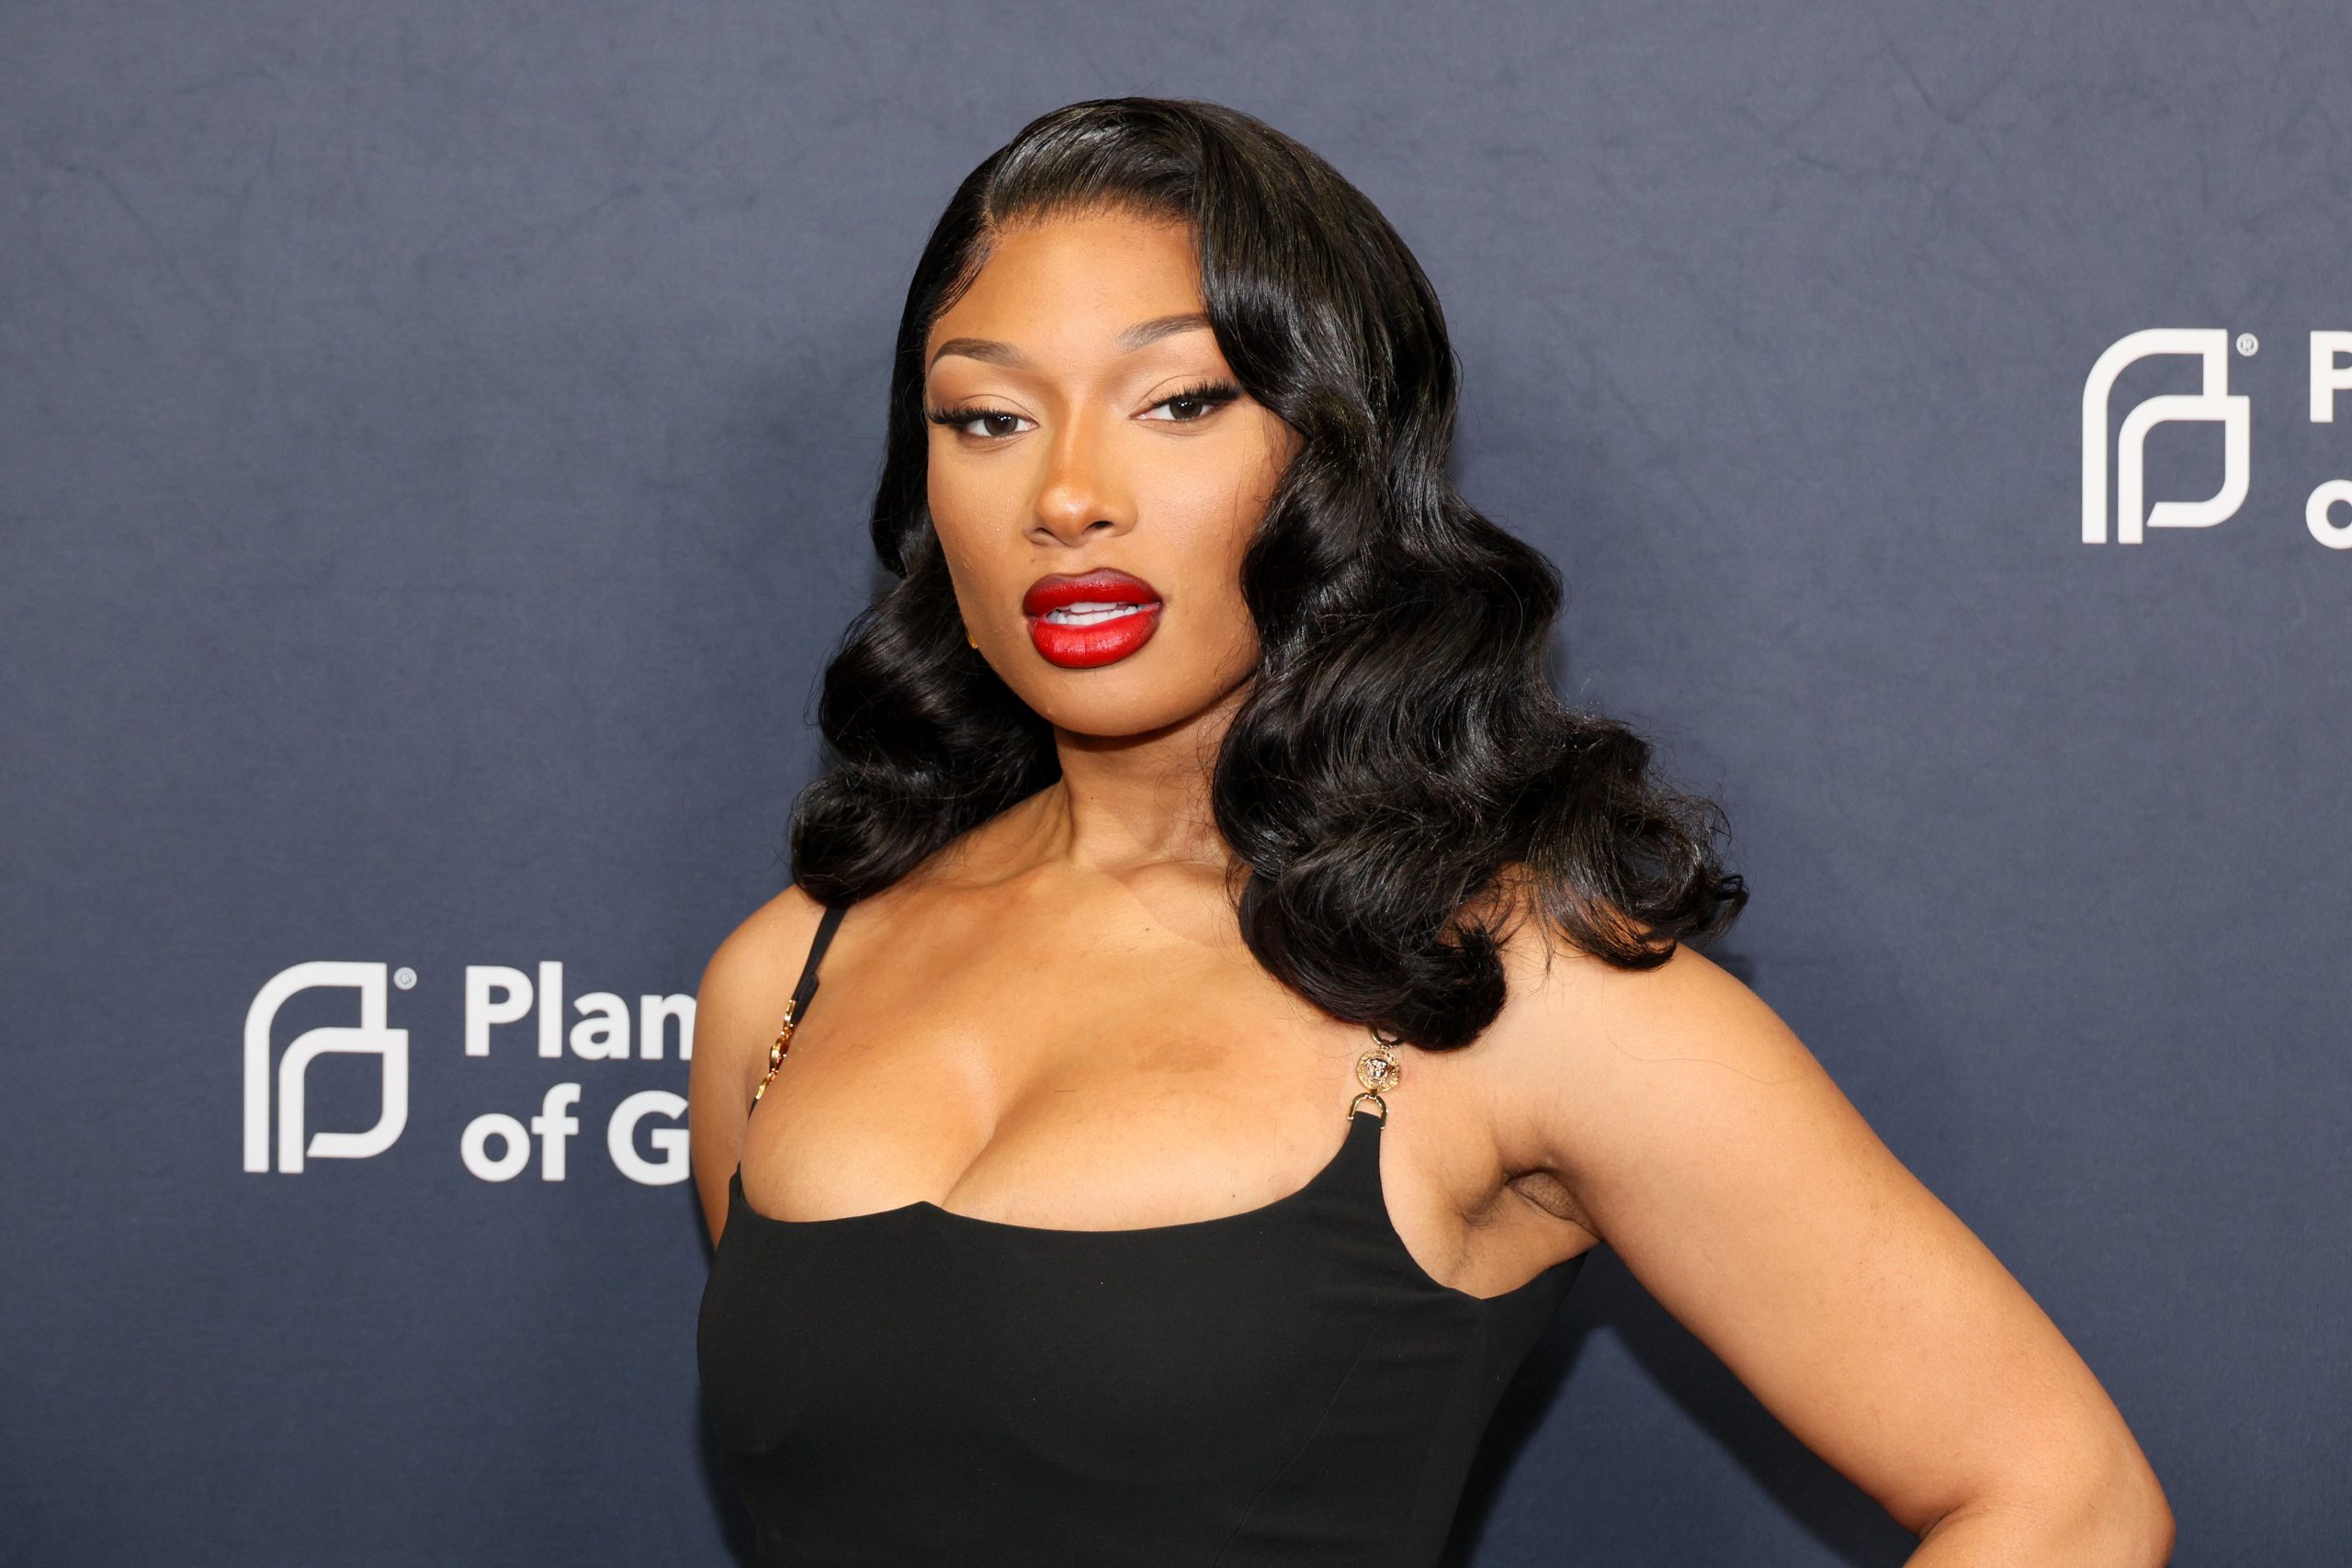 Rapper Megan Thee Stallion denies allegations she forced cameraman to watch her have s3x with a woman